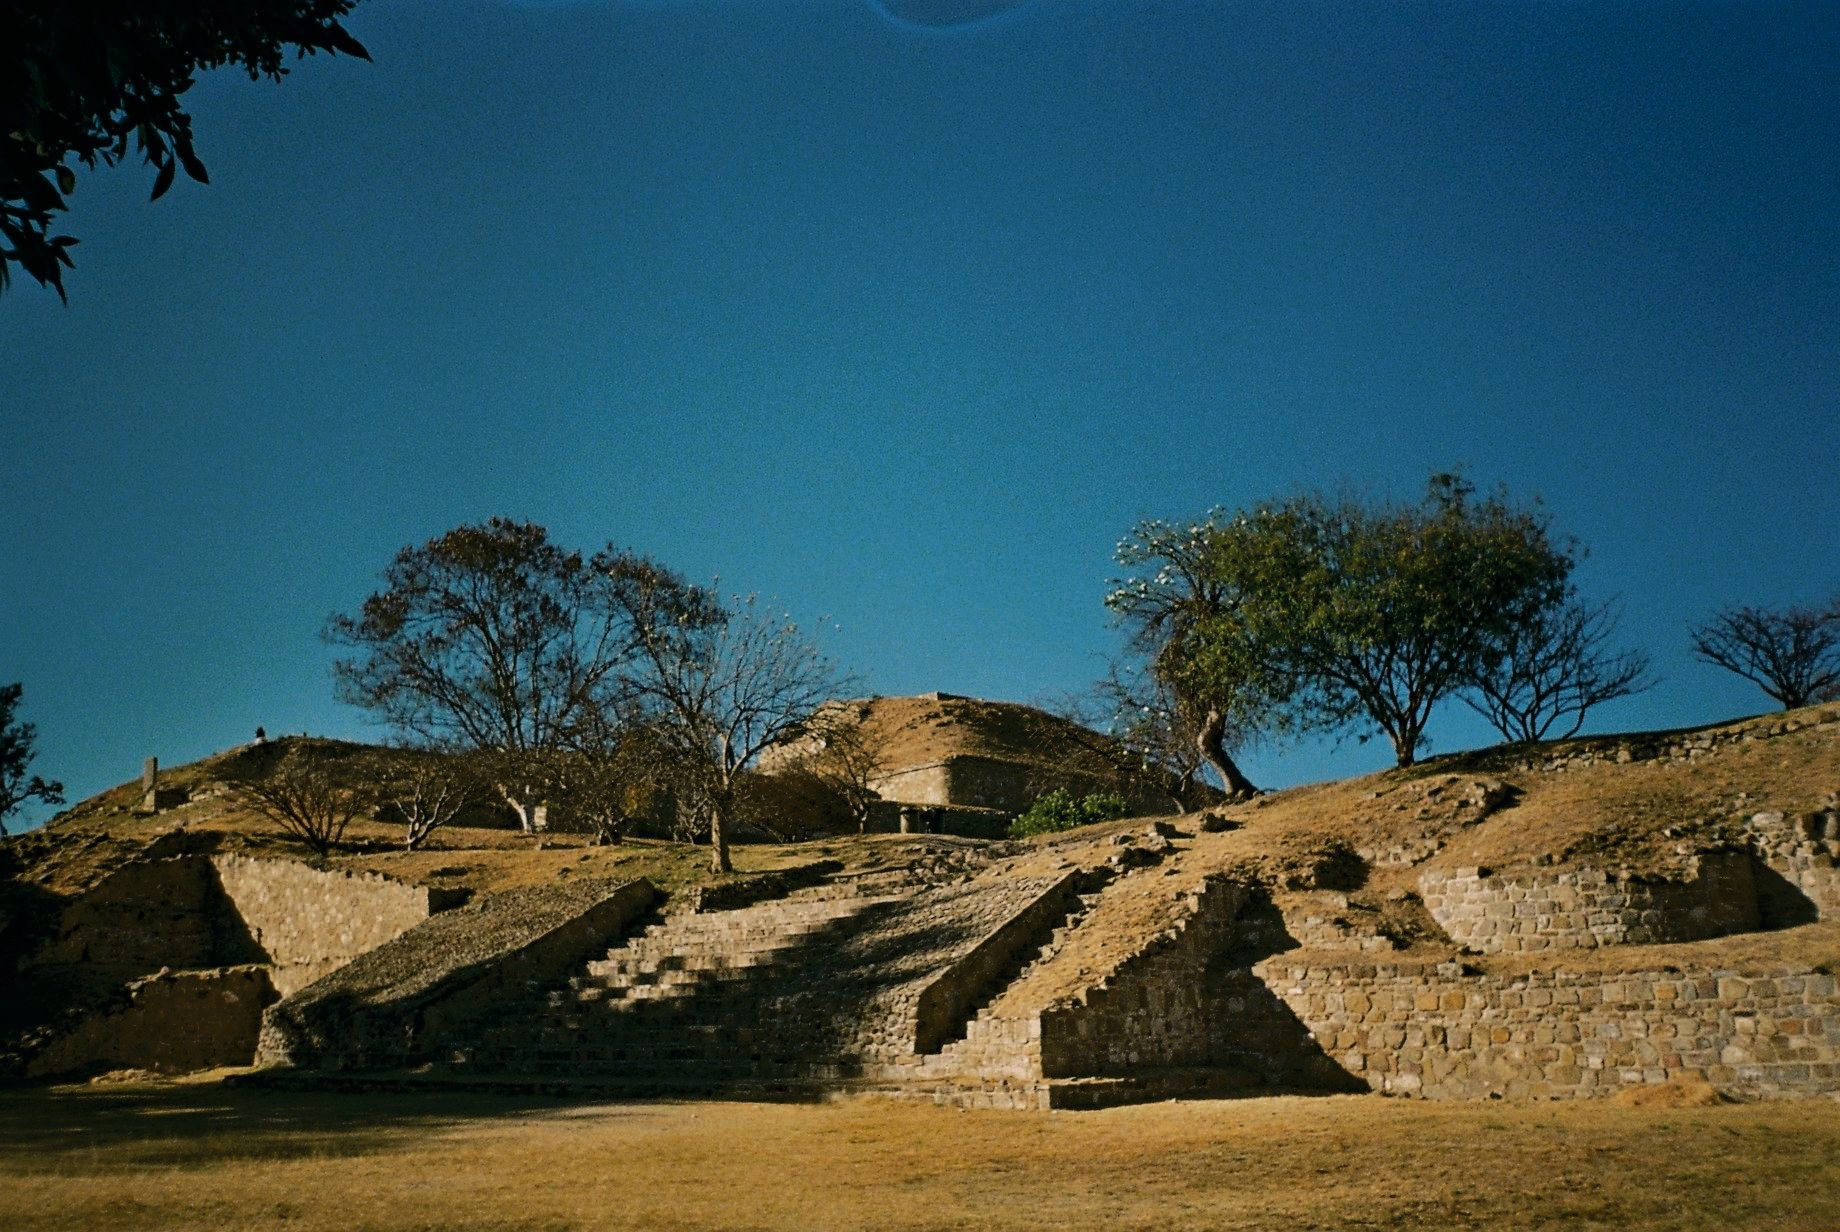 Monte Alban 01-2020 - 4 of 33